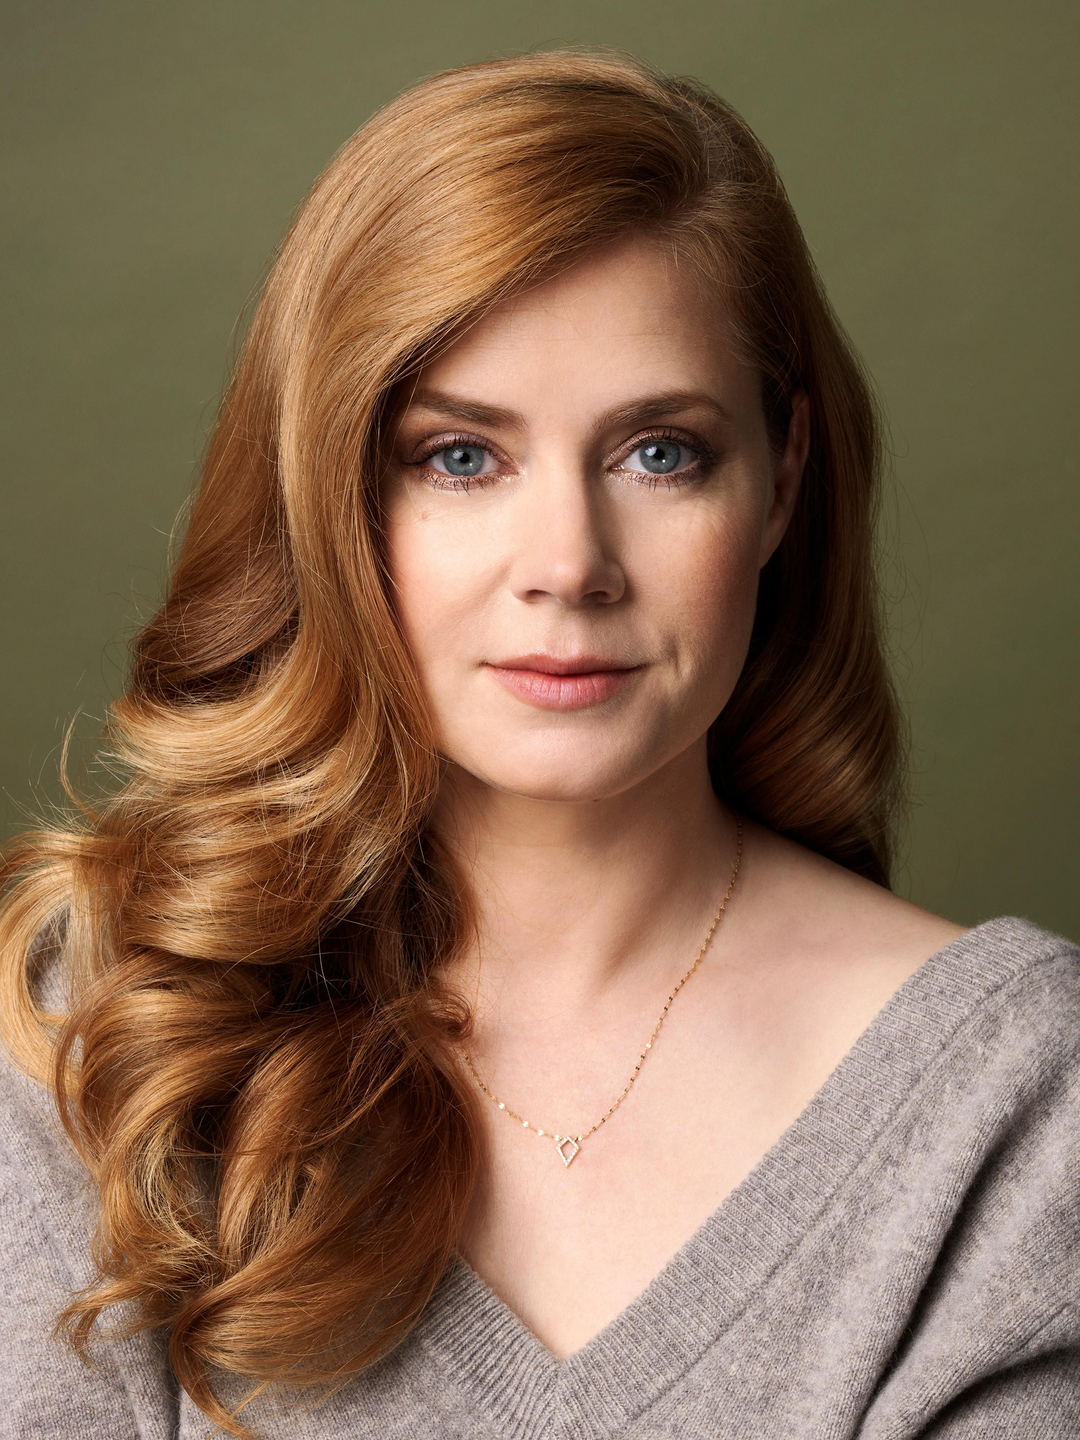 Amy Adams who is her mother